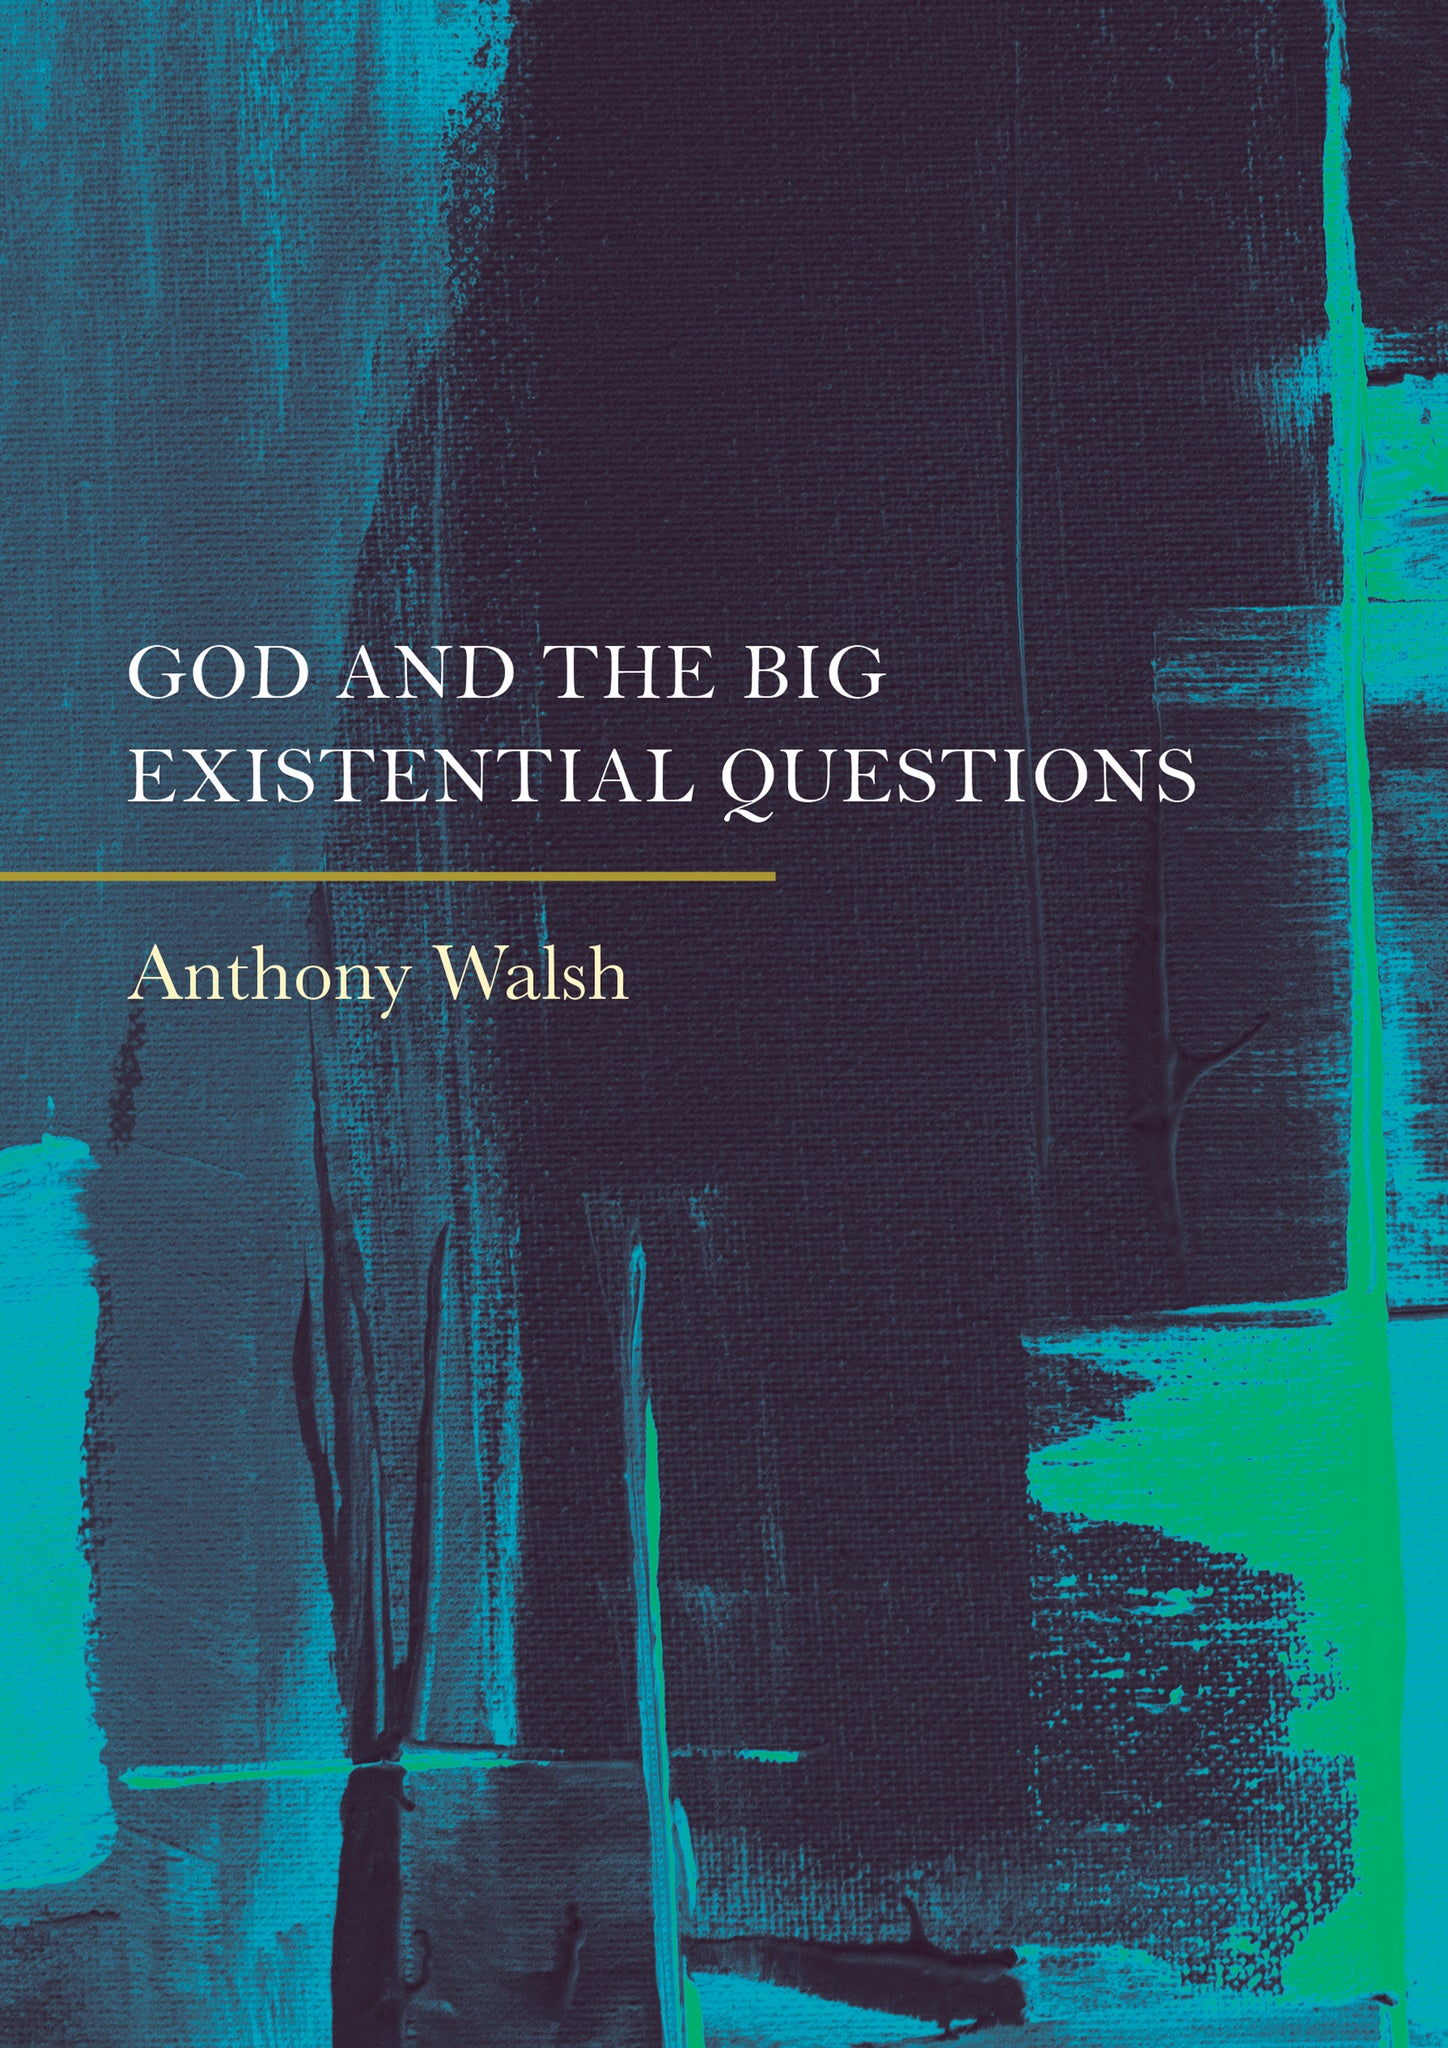 God and the Big Existential Questions